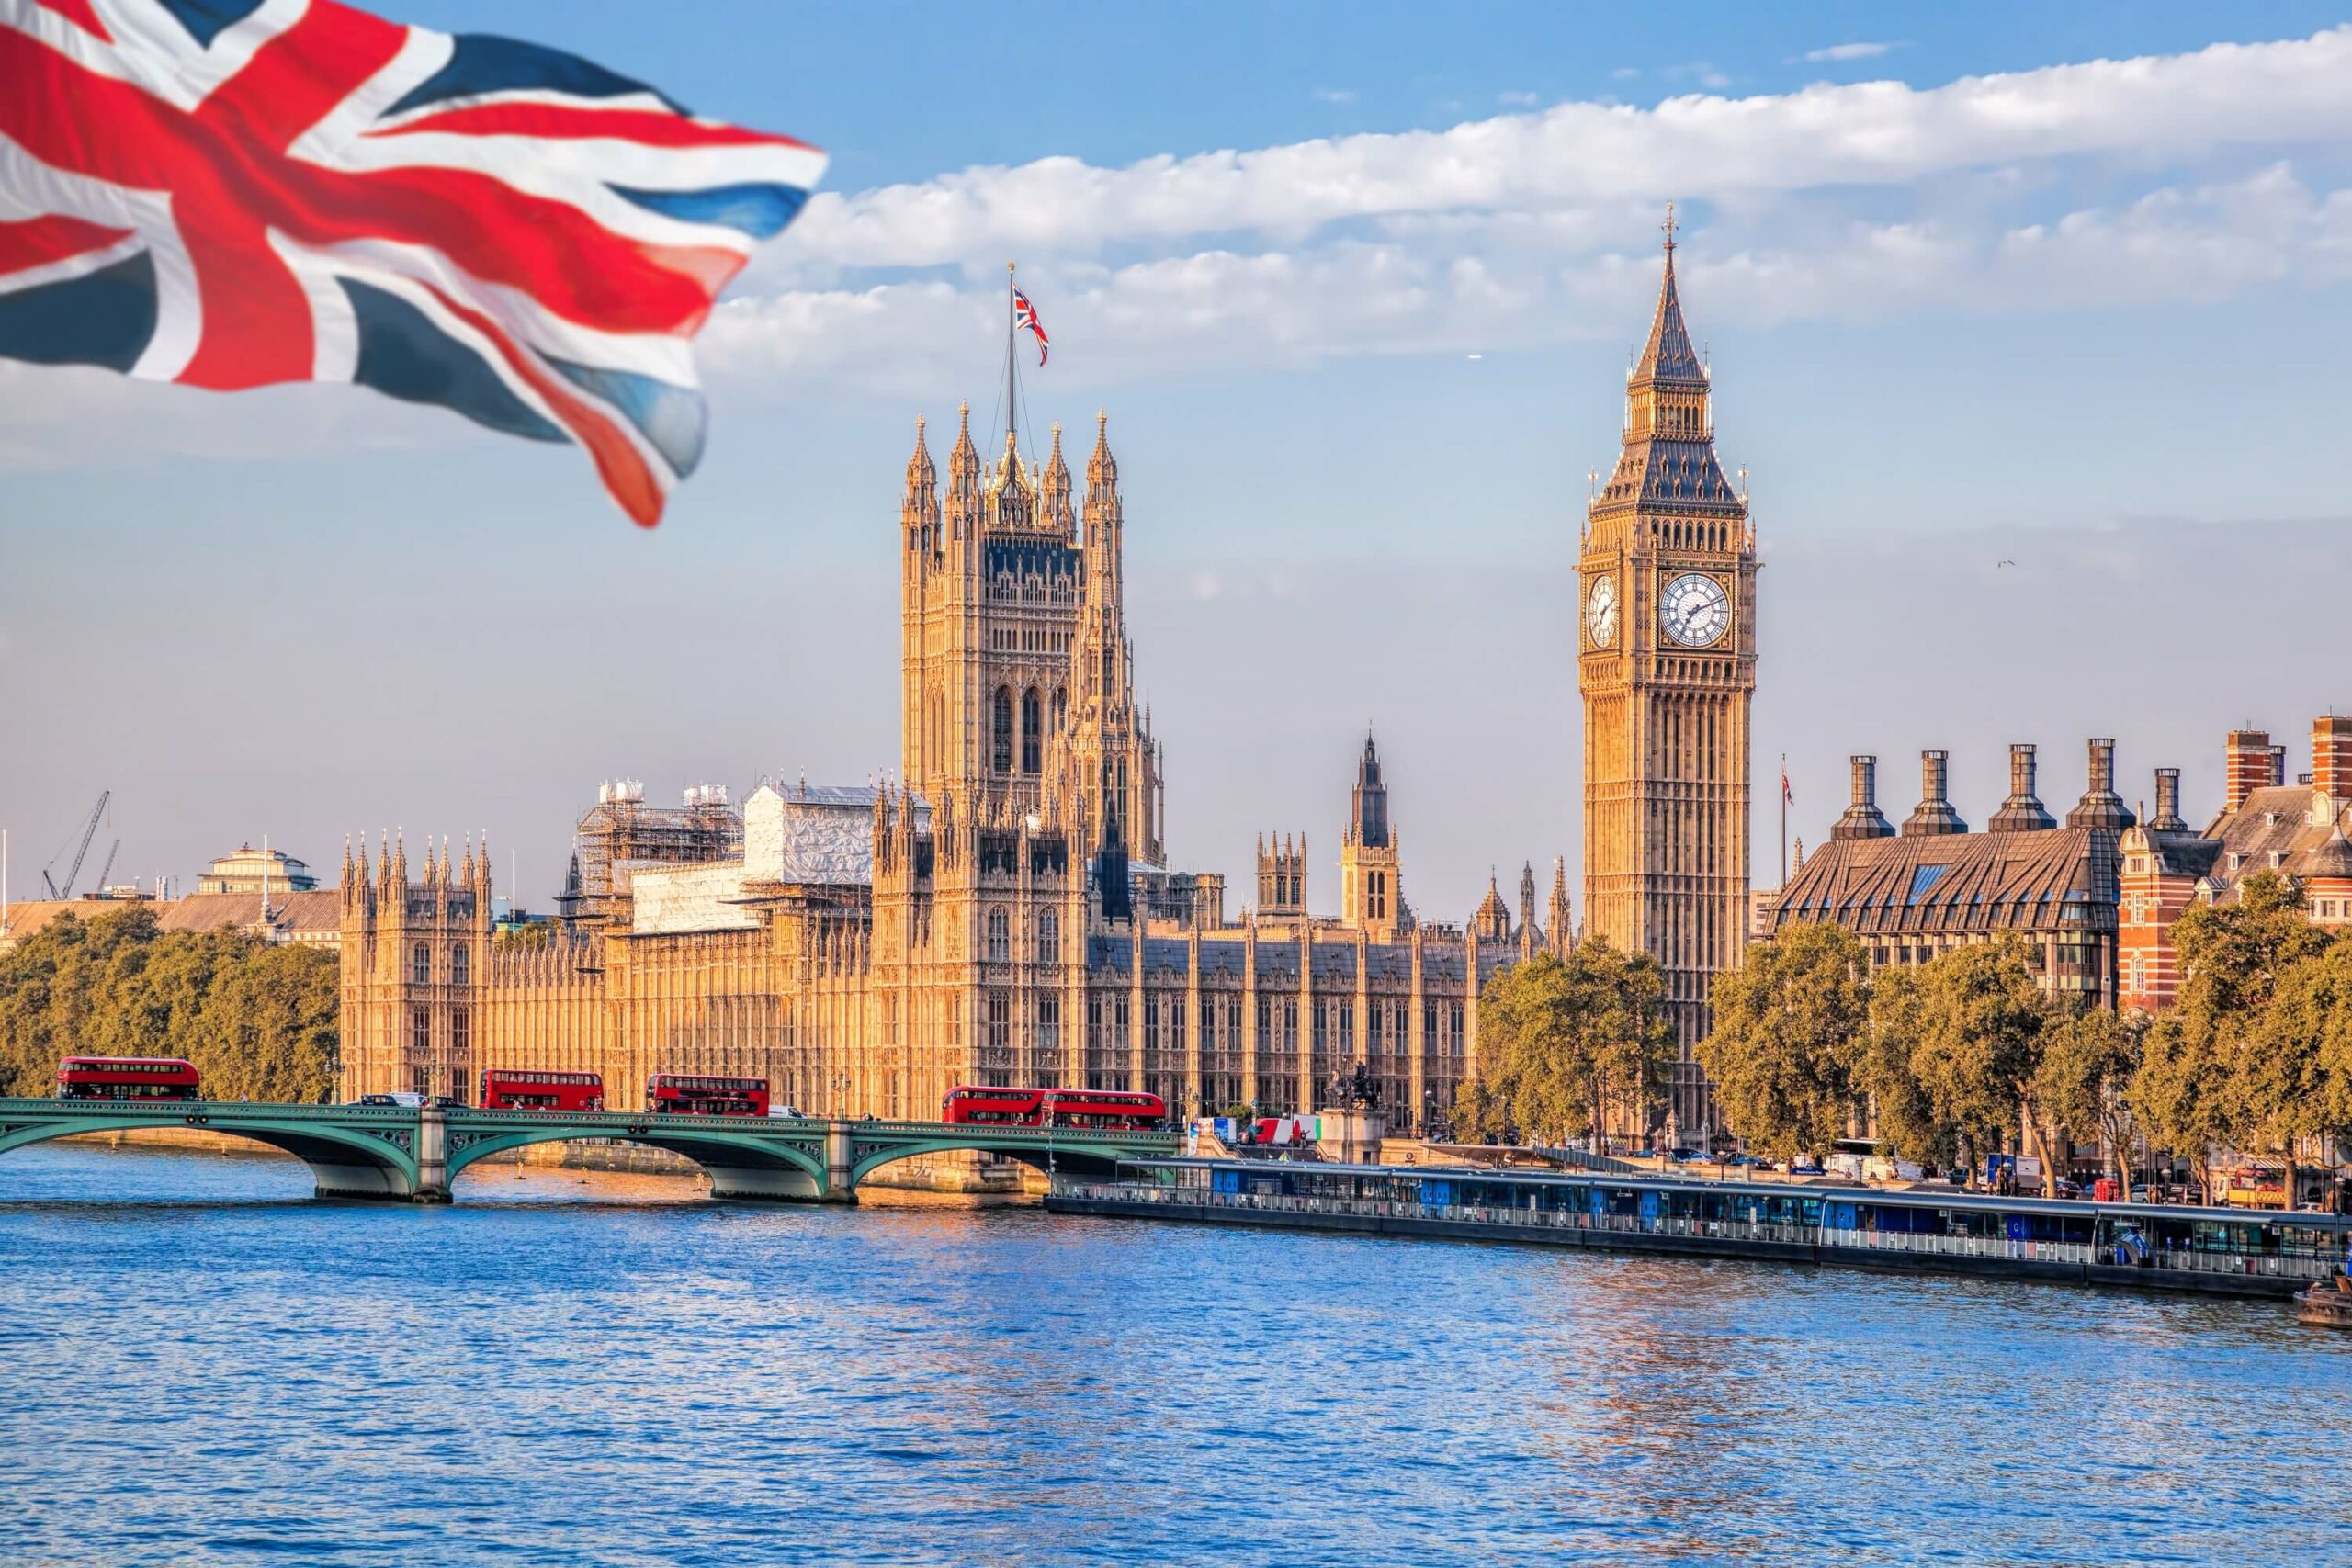 The British flag is flying over Big Ben and the Houses of Parliament in London, a must-see sight for travelers visiting the city.